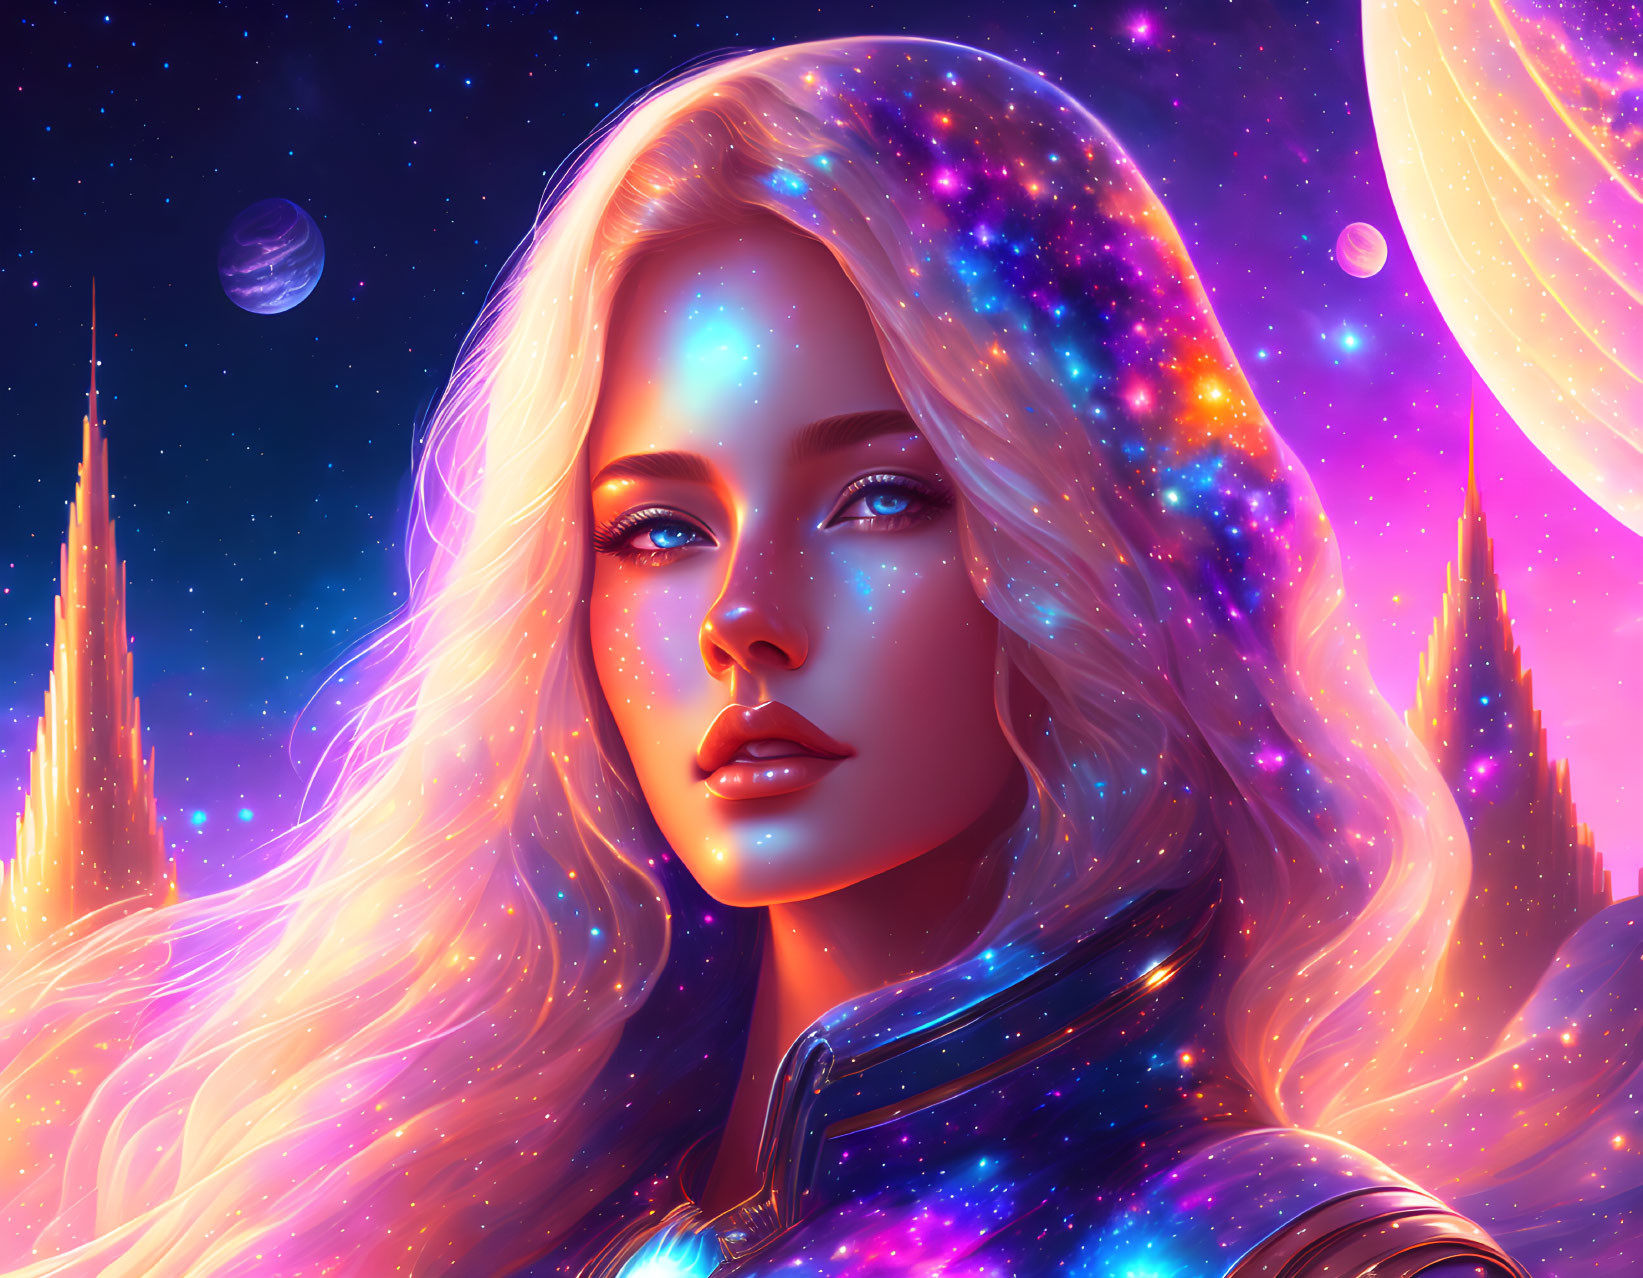 Digital artwork featuring woman with cosmic hair and space backdrop.